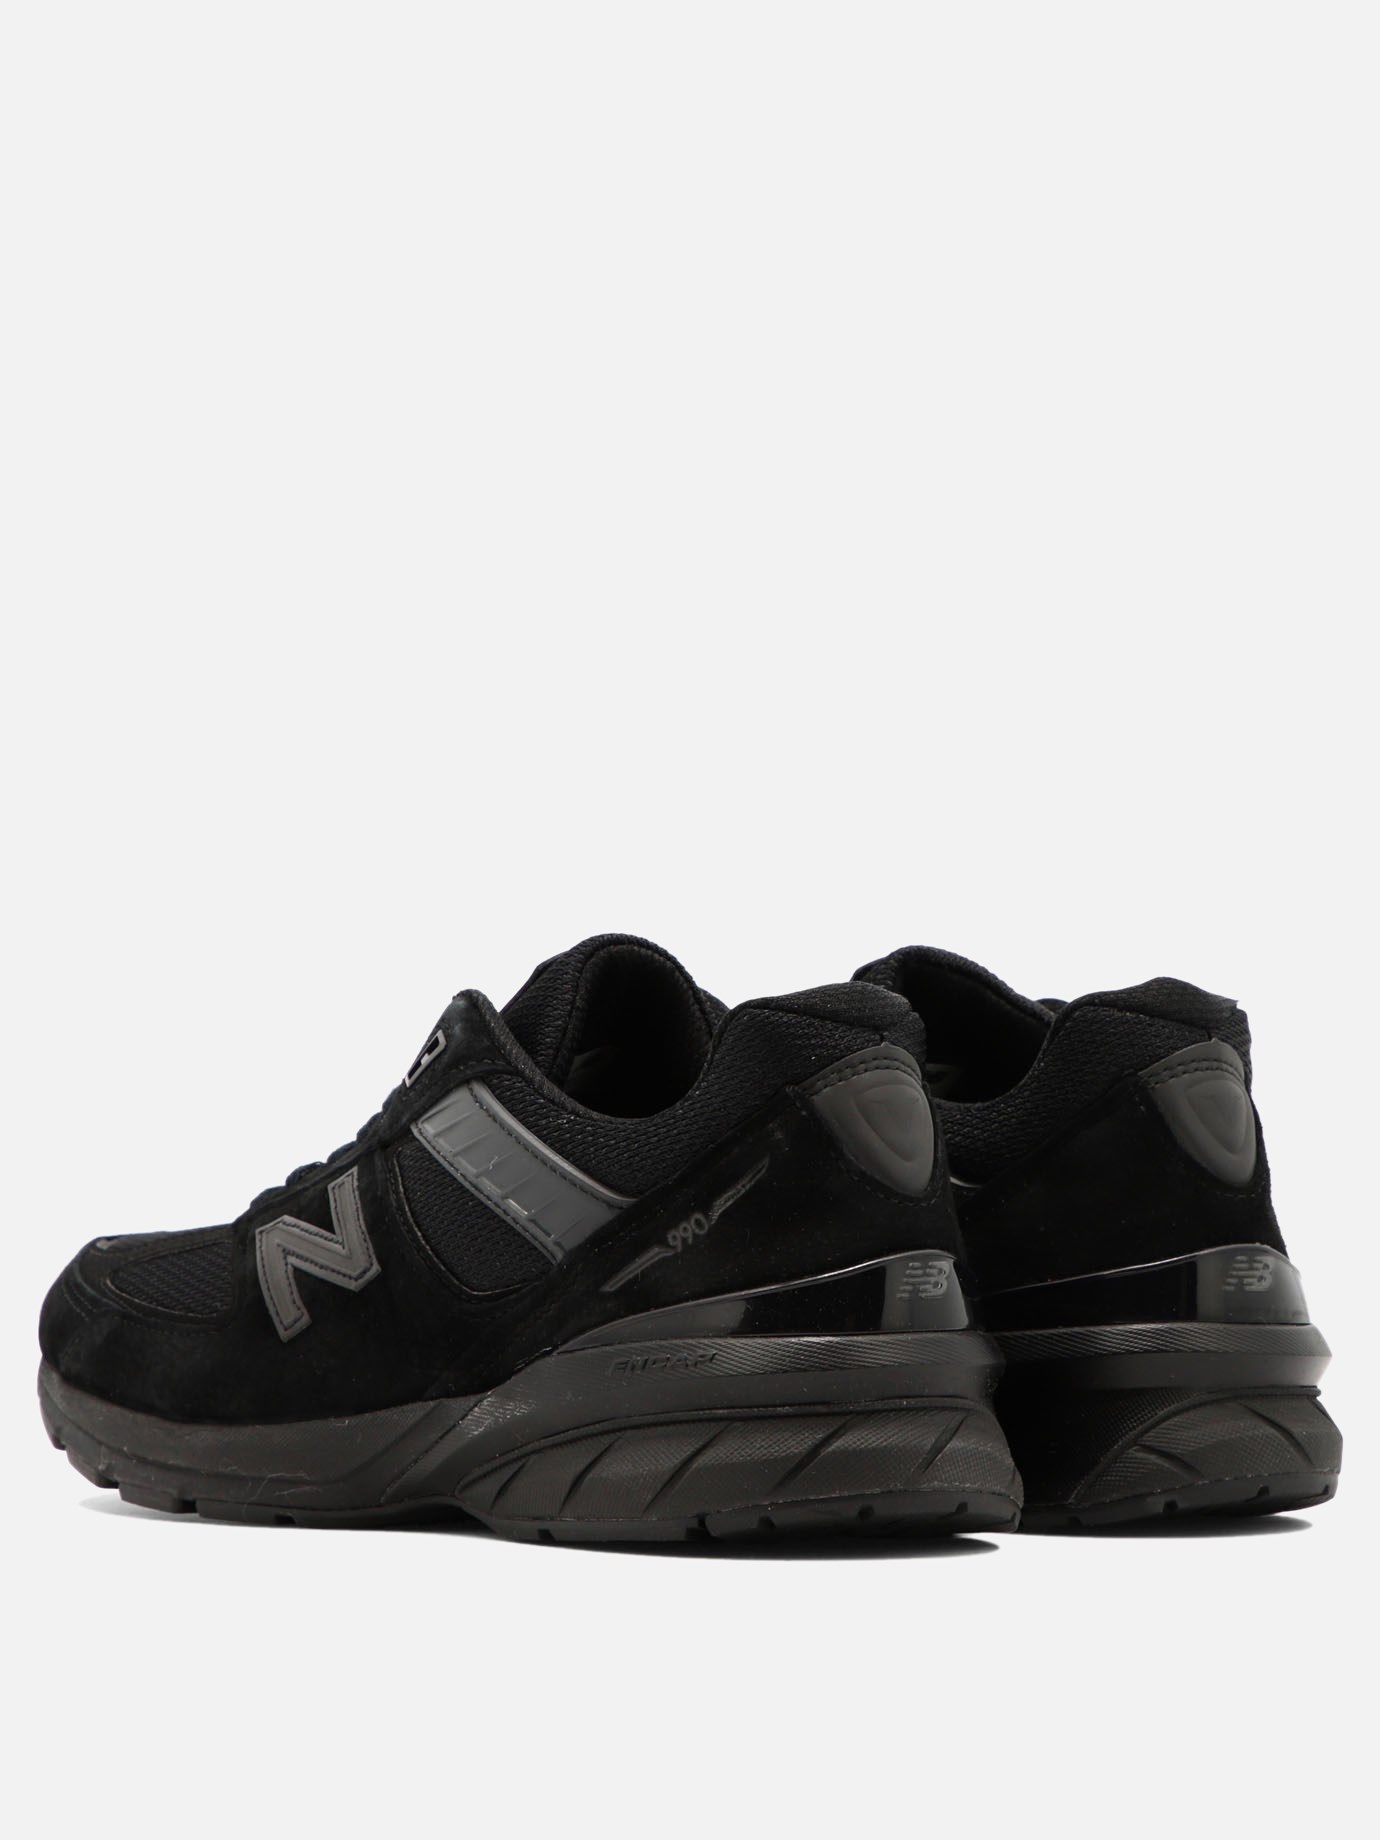  990V5  sneakers by New Balance